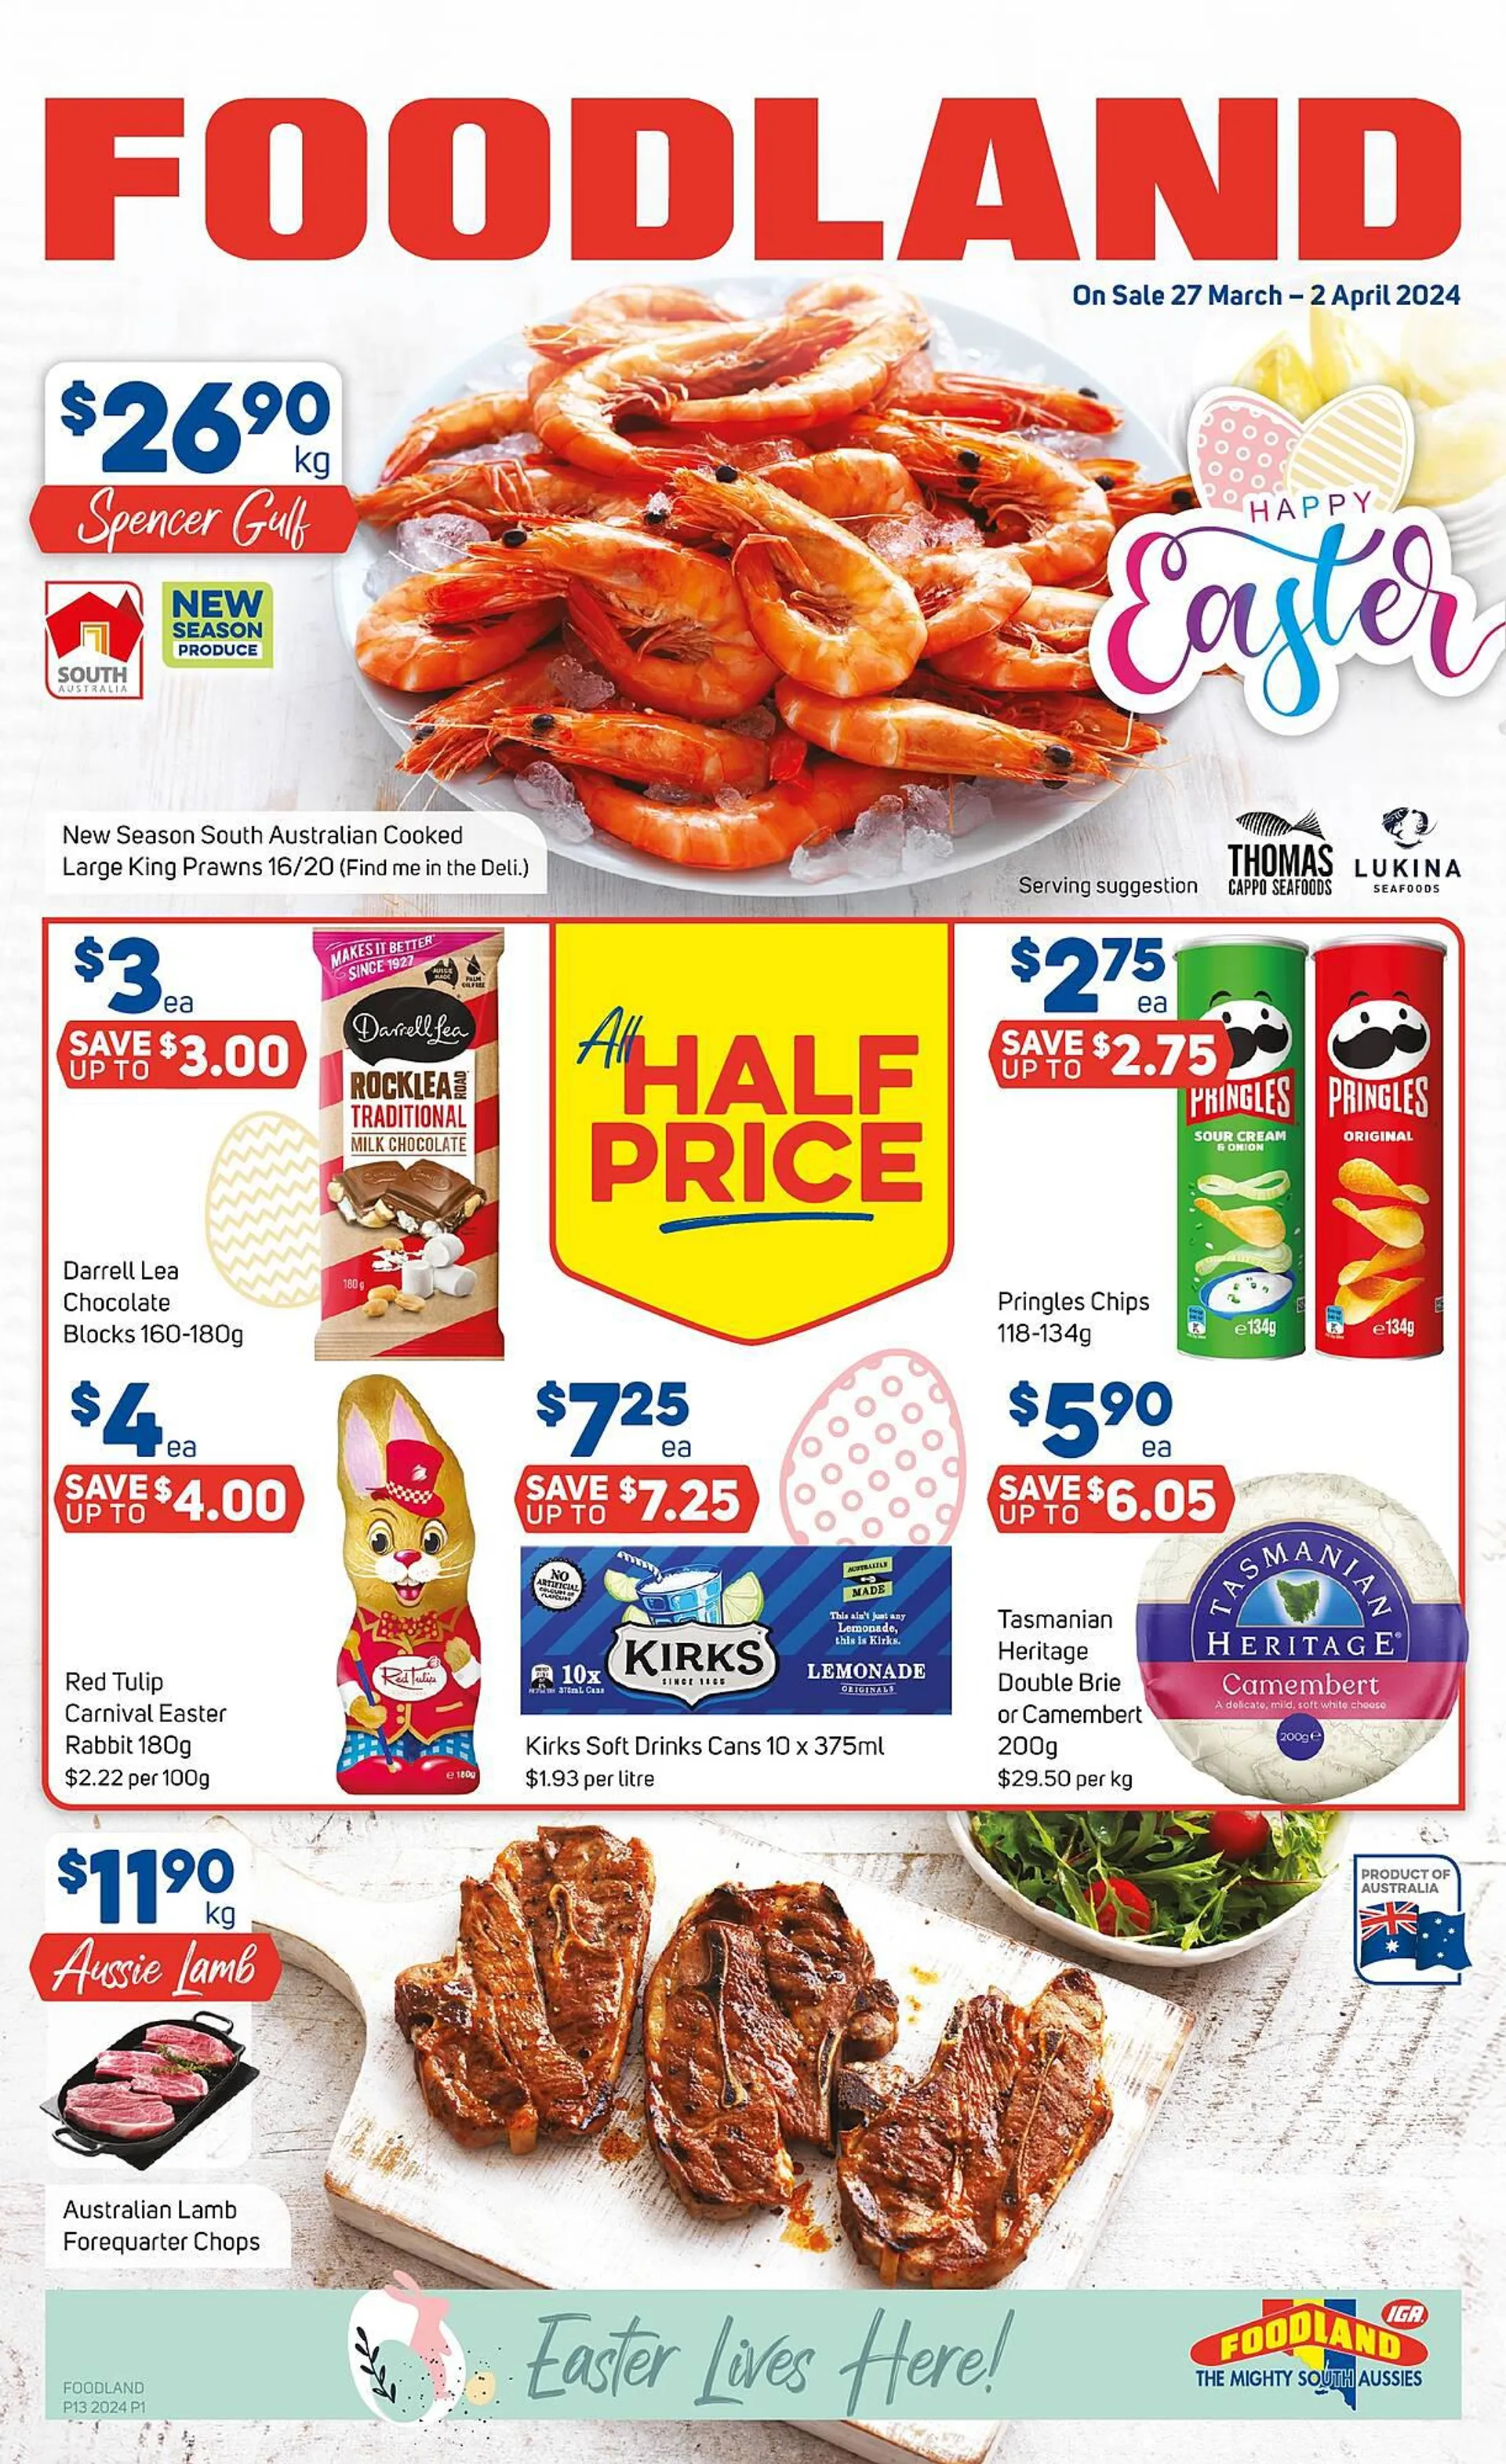 Foodland catalogue - Catalogue valid from 27 March to 2 April 2024 - page 